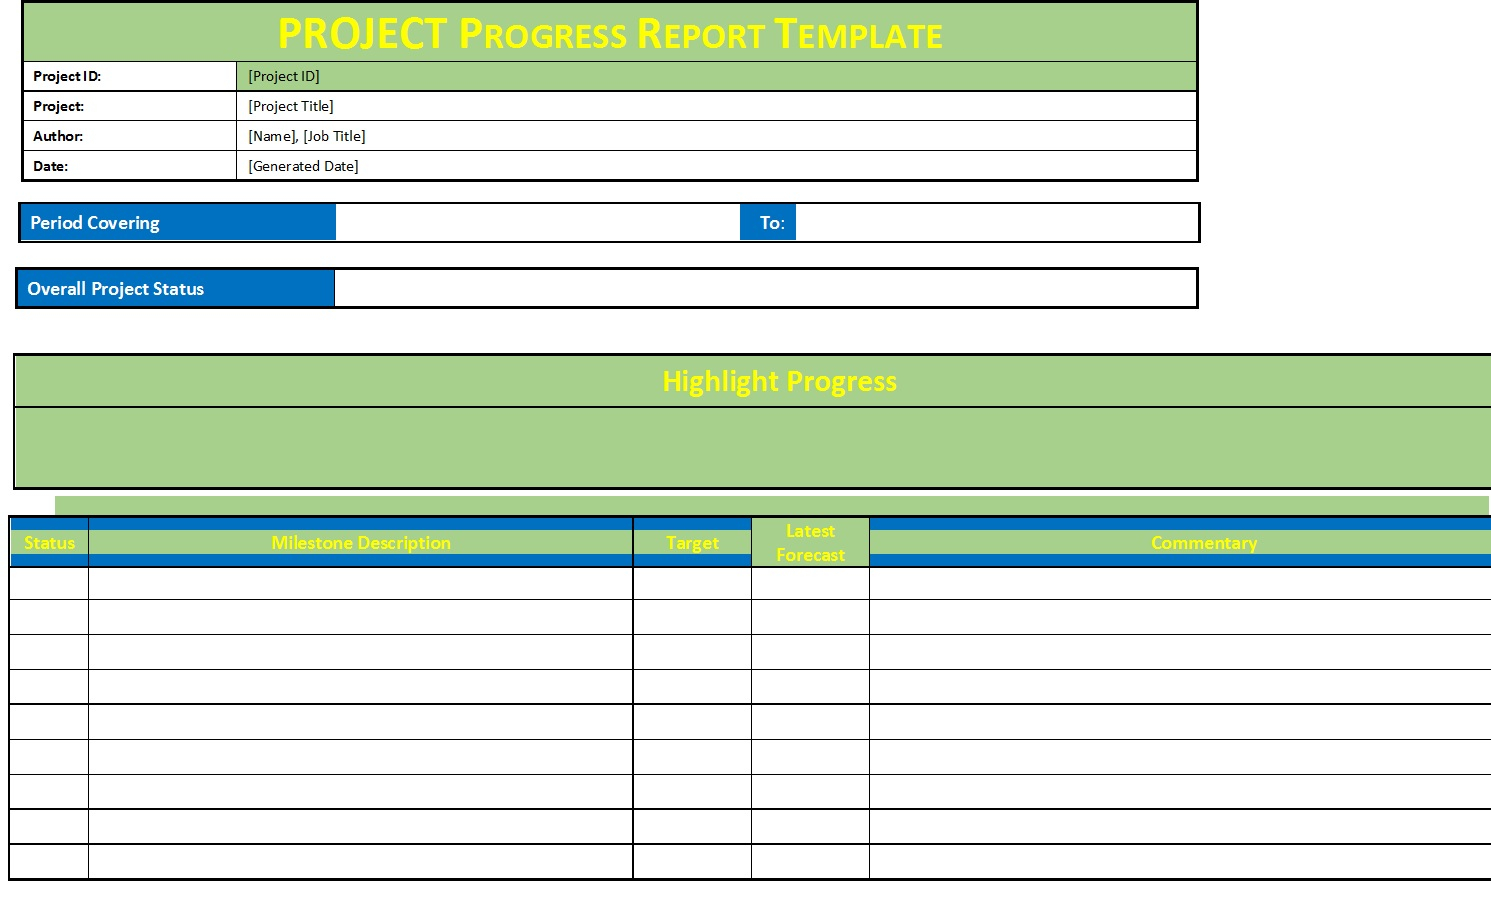 Project Progress Report Template (PPR) - Free Report Templates Regarding Progress Report Template For Construction Project